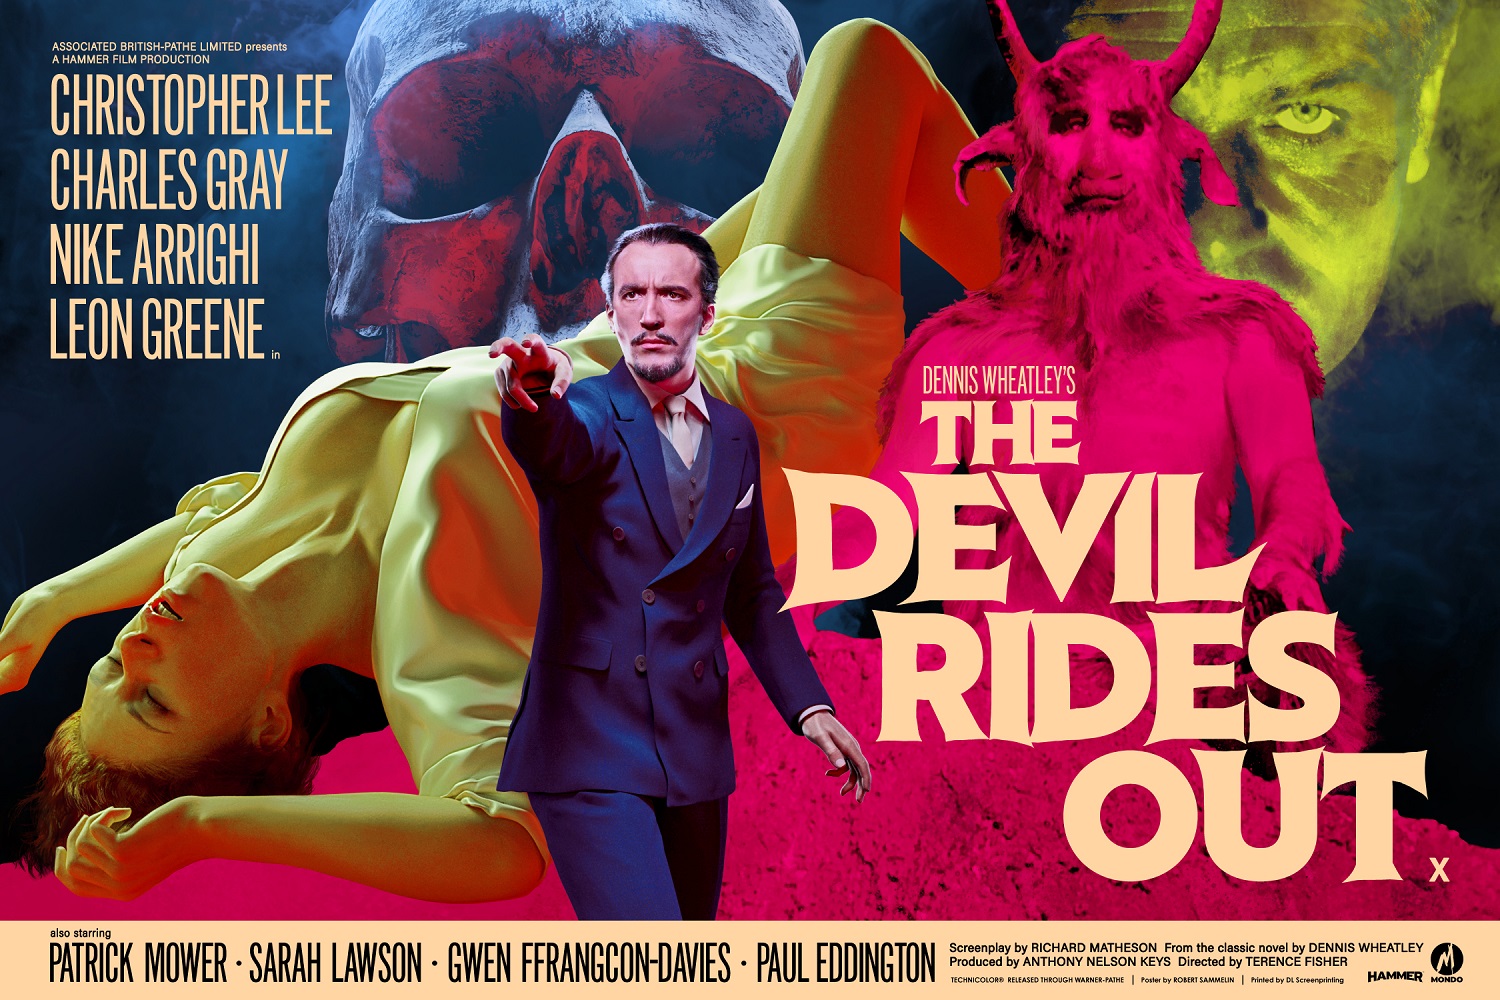 Cool Art Hammer Horror S The Devil Rides Out And Dracula Prince Of Darkness Live For Films